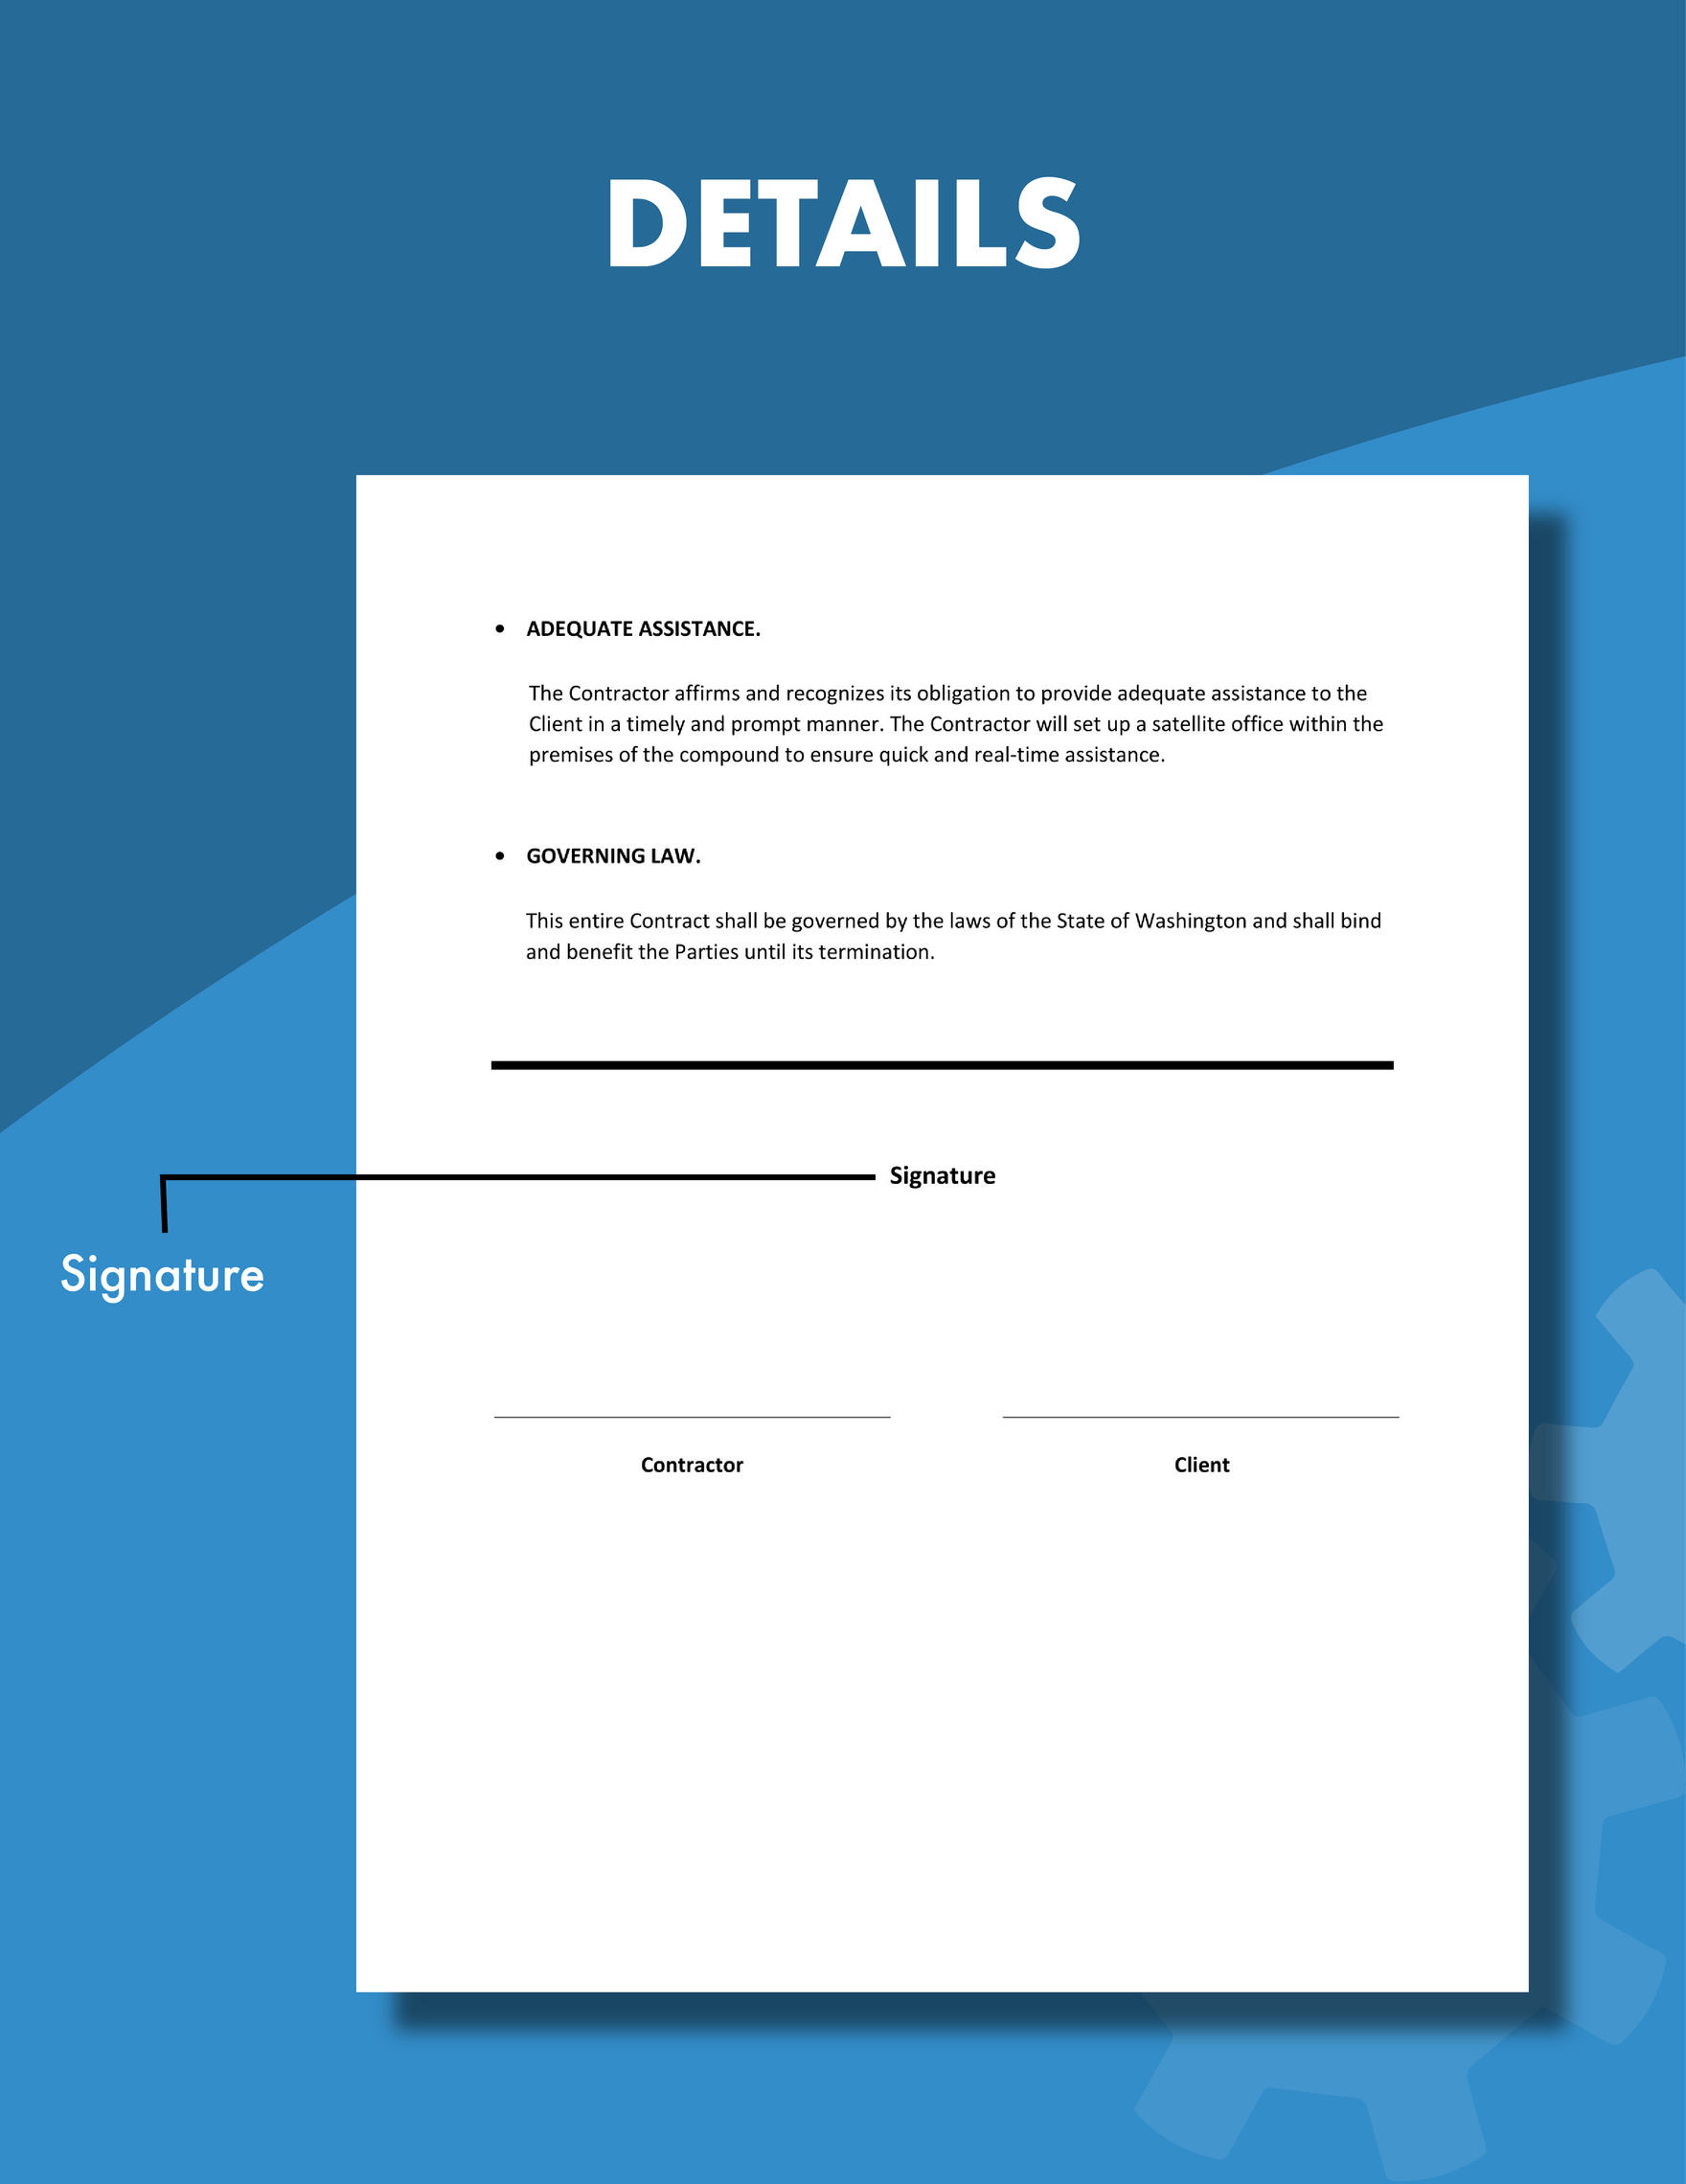 Maintenance Services Contract Template